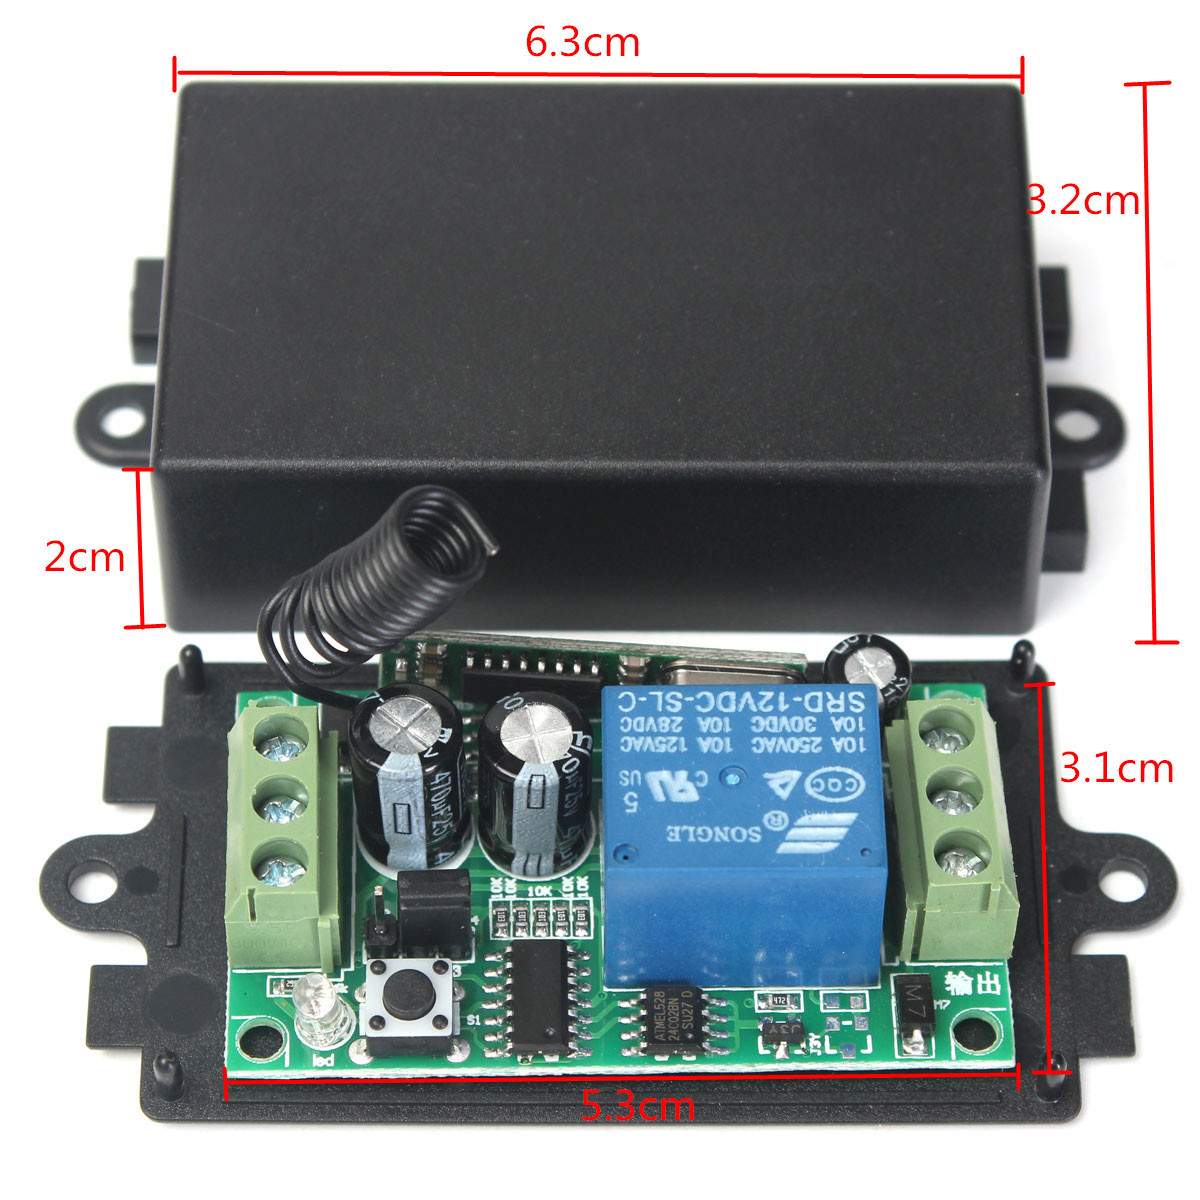 https://www.elecbee.com/image/catalog/Smart-Module/Geekcreitreg-433MHz-DC-12V-10A-Relay-1CH-Channel-Wireless-RF-Remote-Control-Switch-Transmitter-With--1040721-descriptionImage0.jpeg